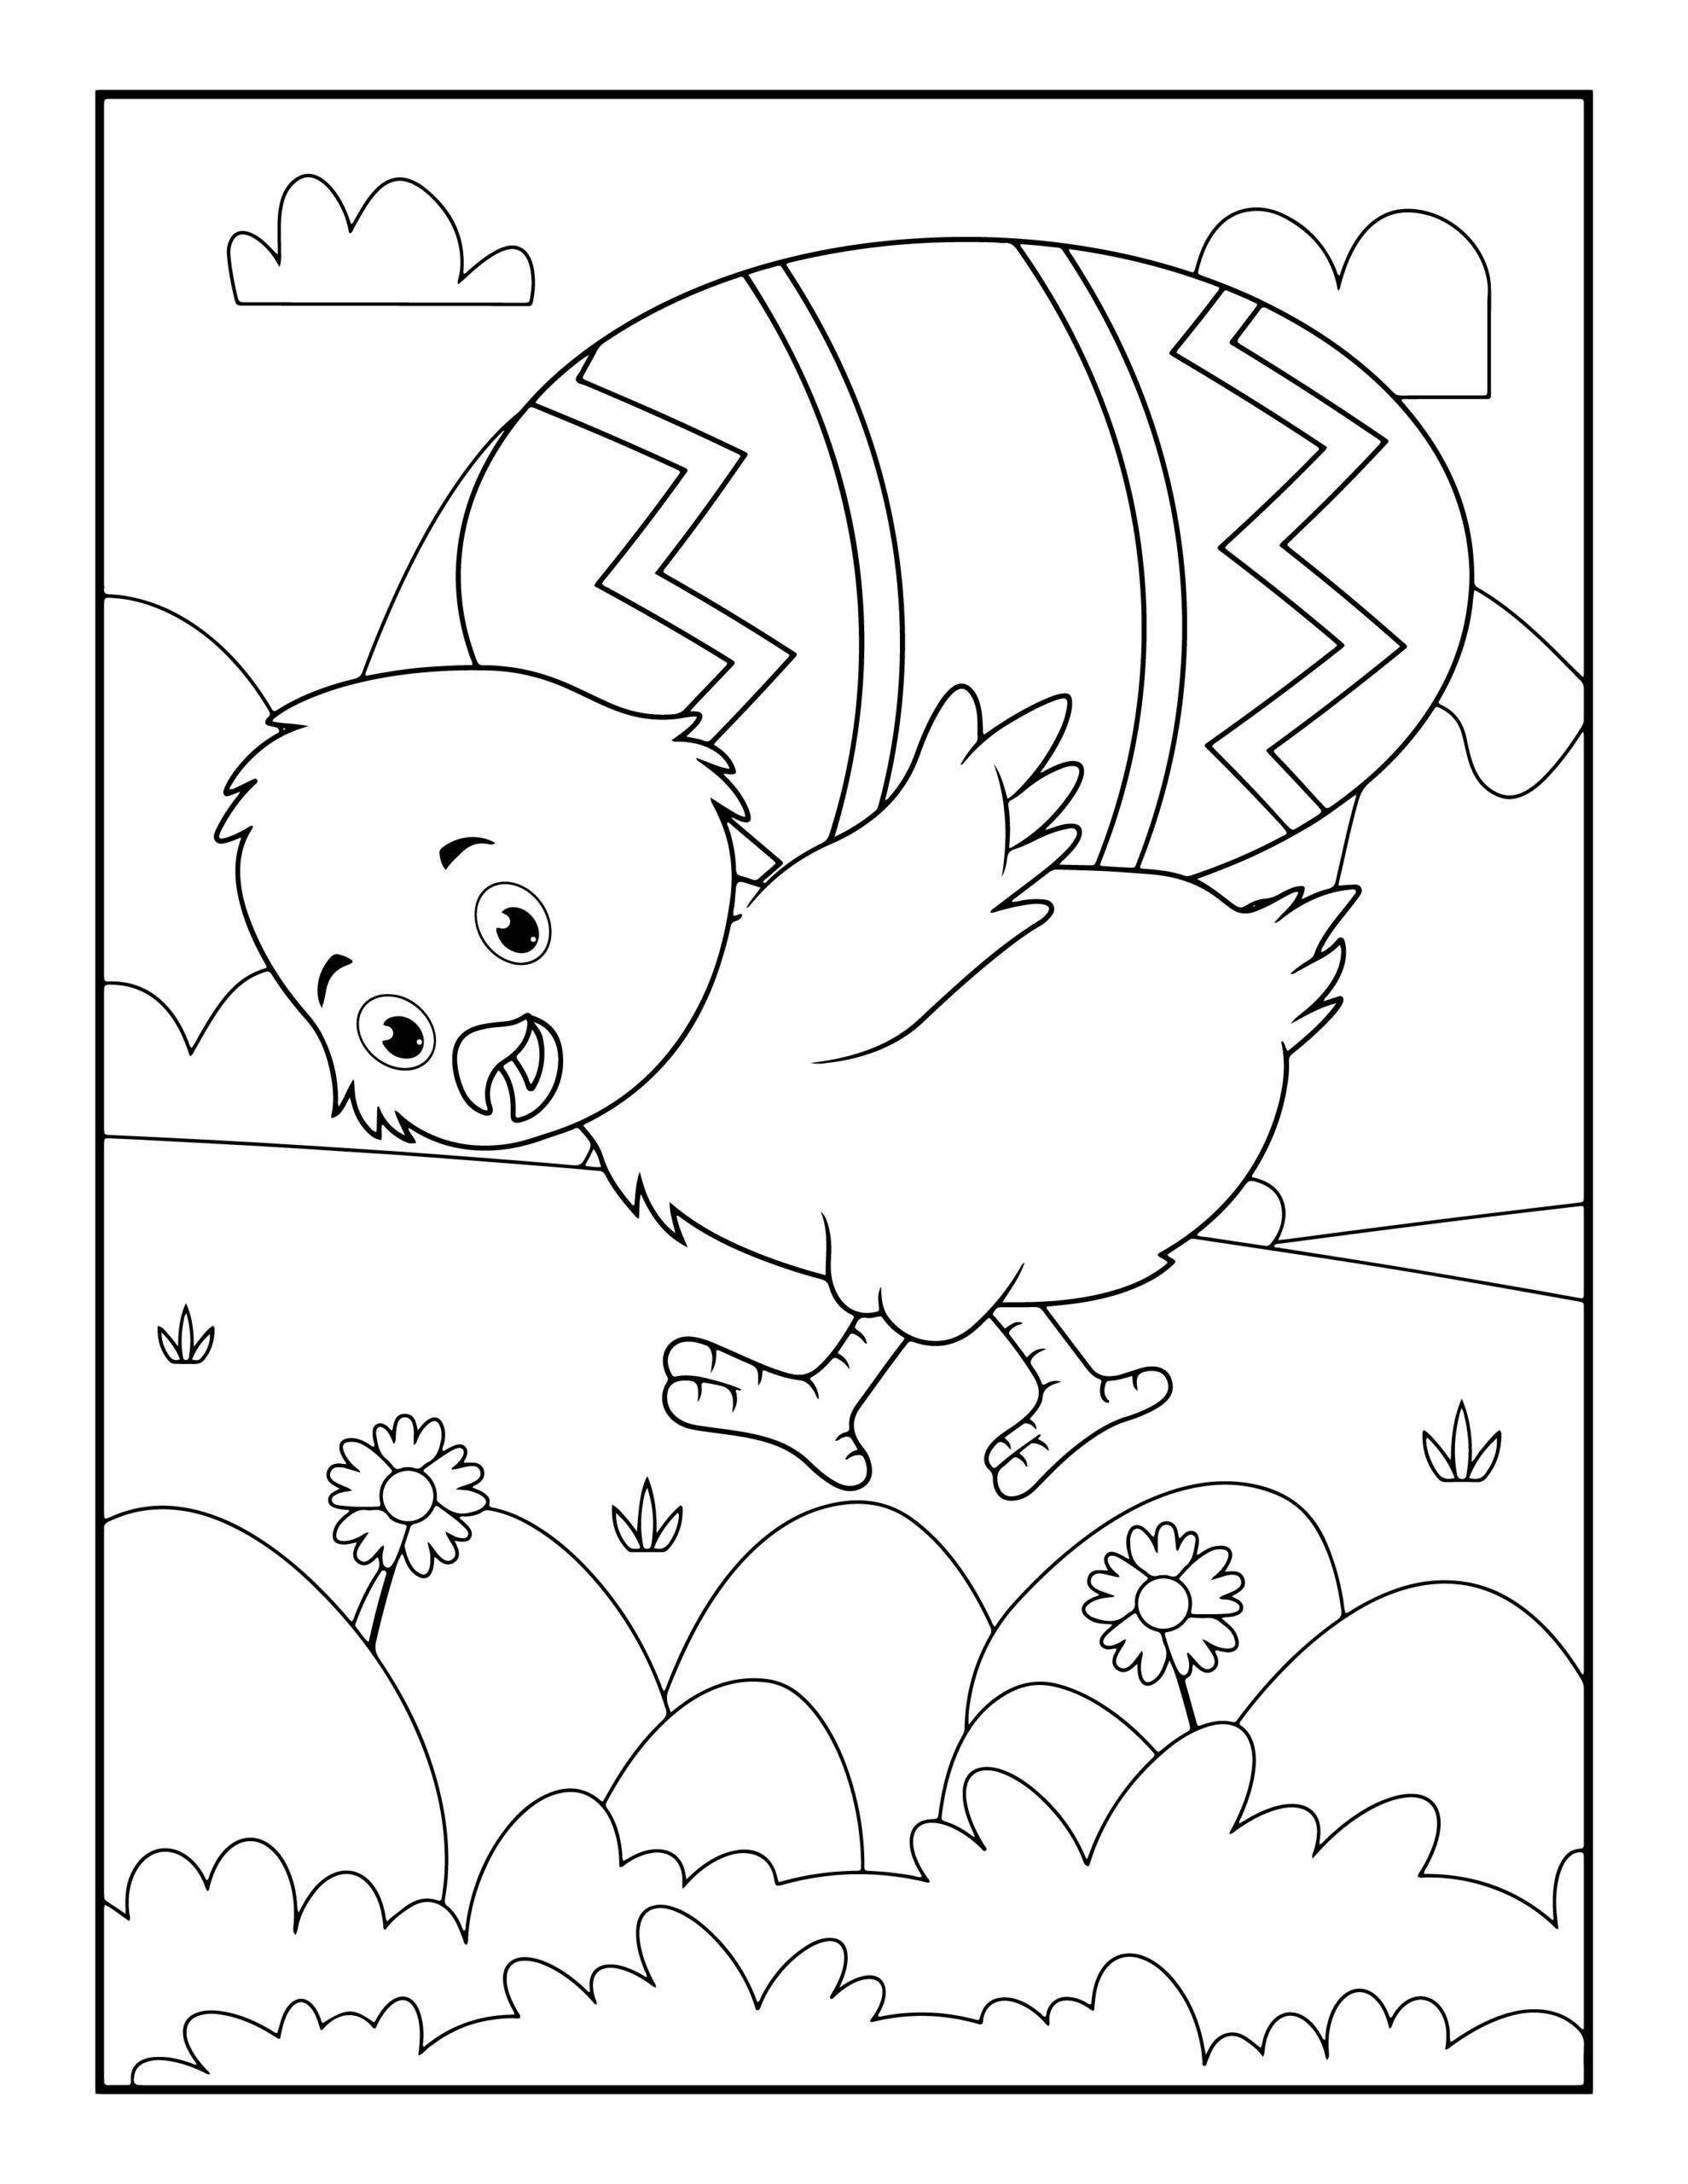 Easter Activity For kids Coloring Page with Chick and Egg